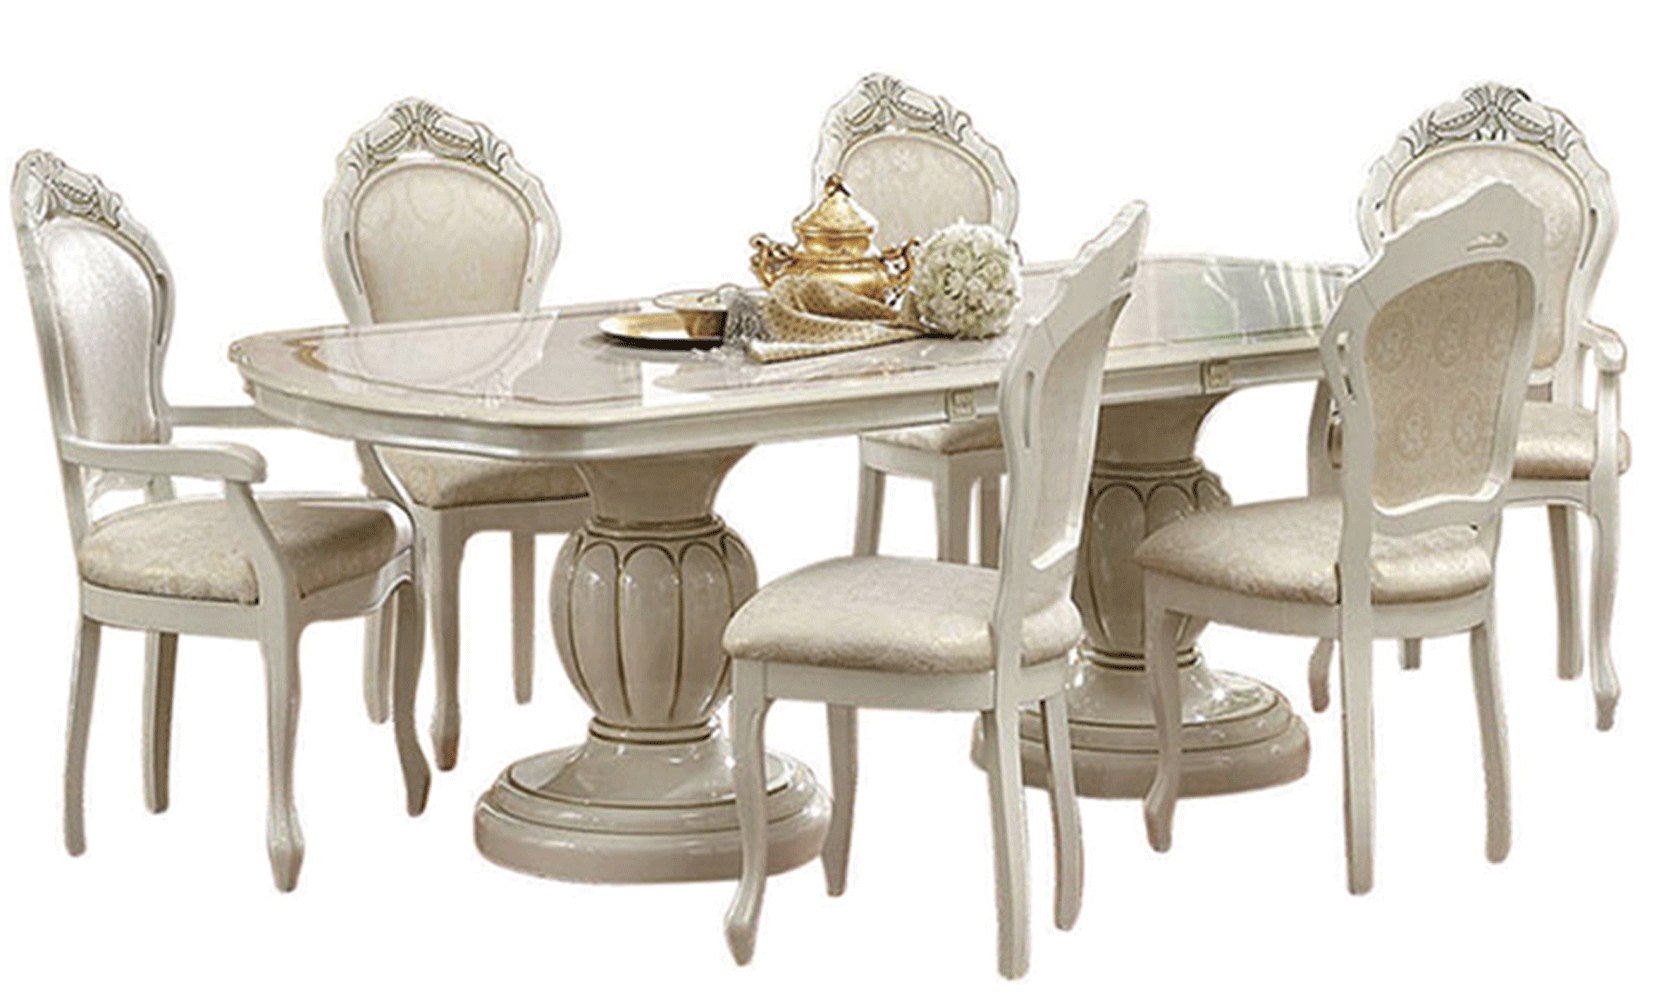 Dining Room Furniture Kitchen Tables and Chairs Sets Leonardo Dining Table